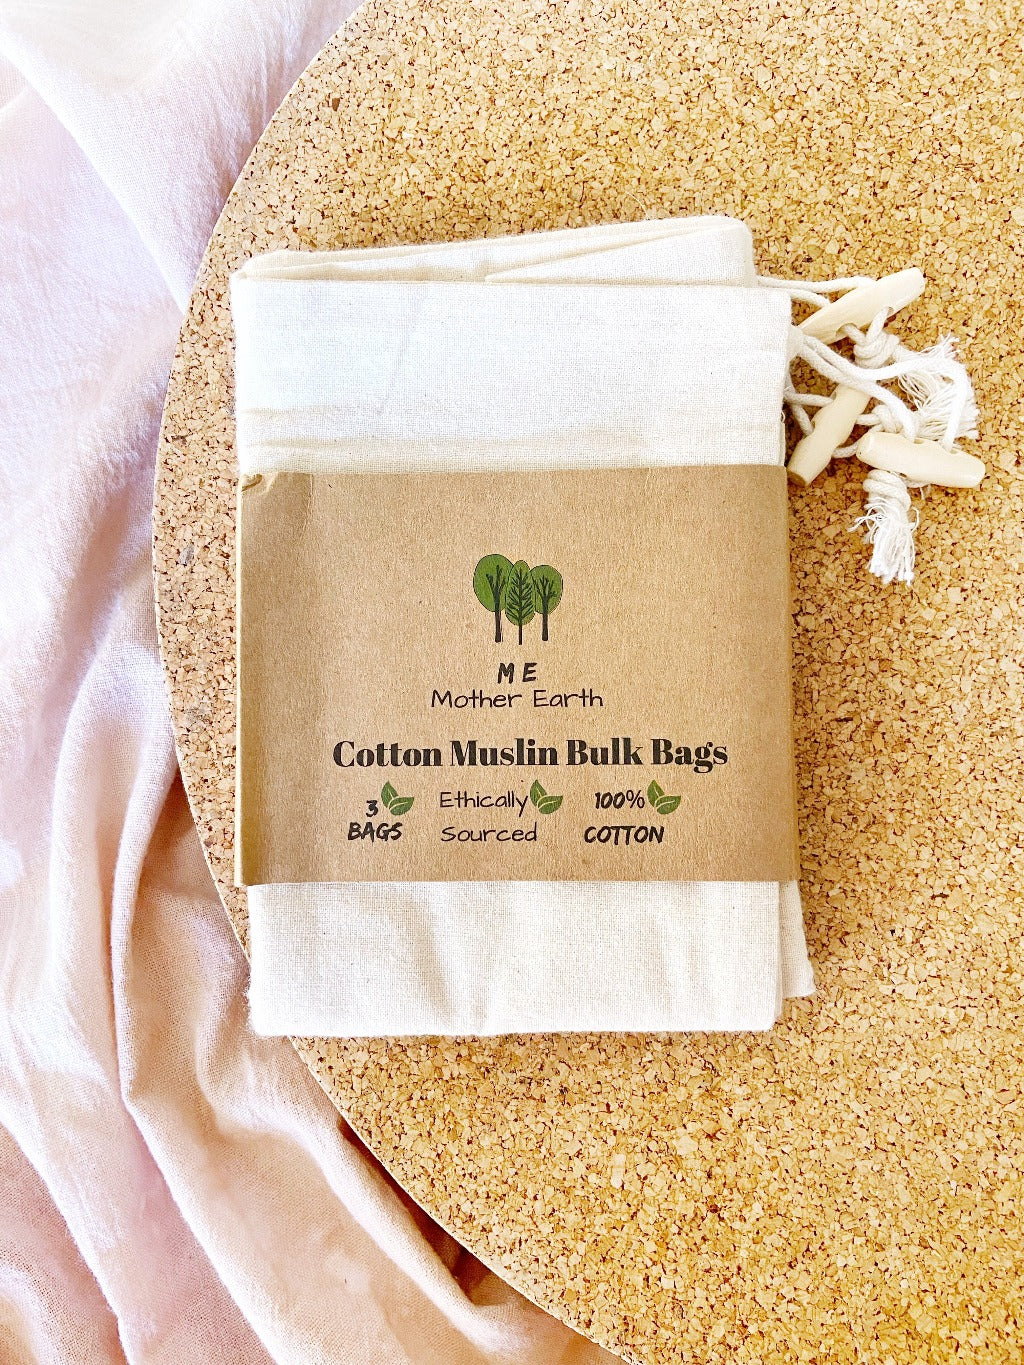 Cotton muslin bulk shopping bags are washable, durable, foldable and reusable for grocery shopping or food storage. 100% cotton and free from any synthetic plastic-based materials such as polyester or nylon. 